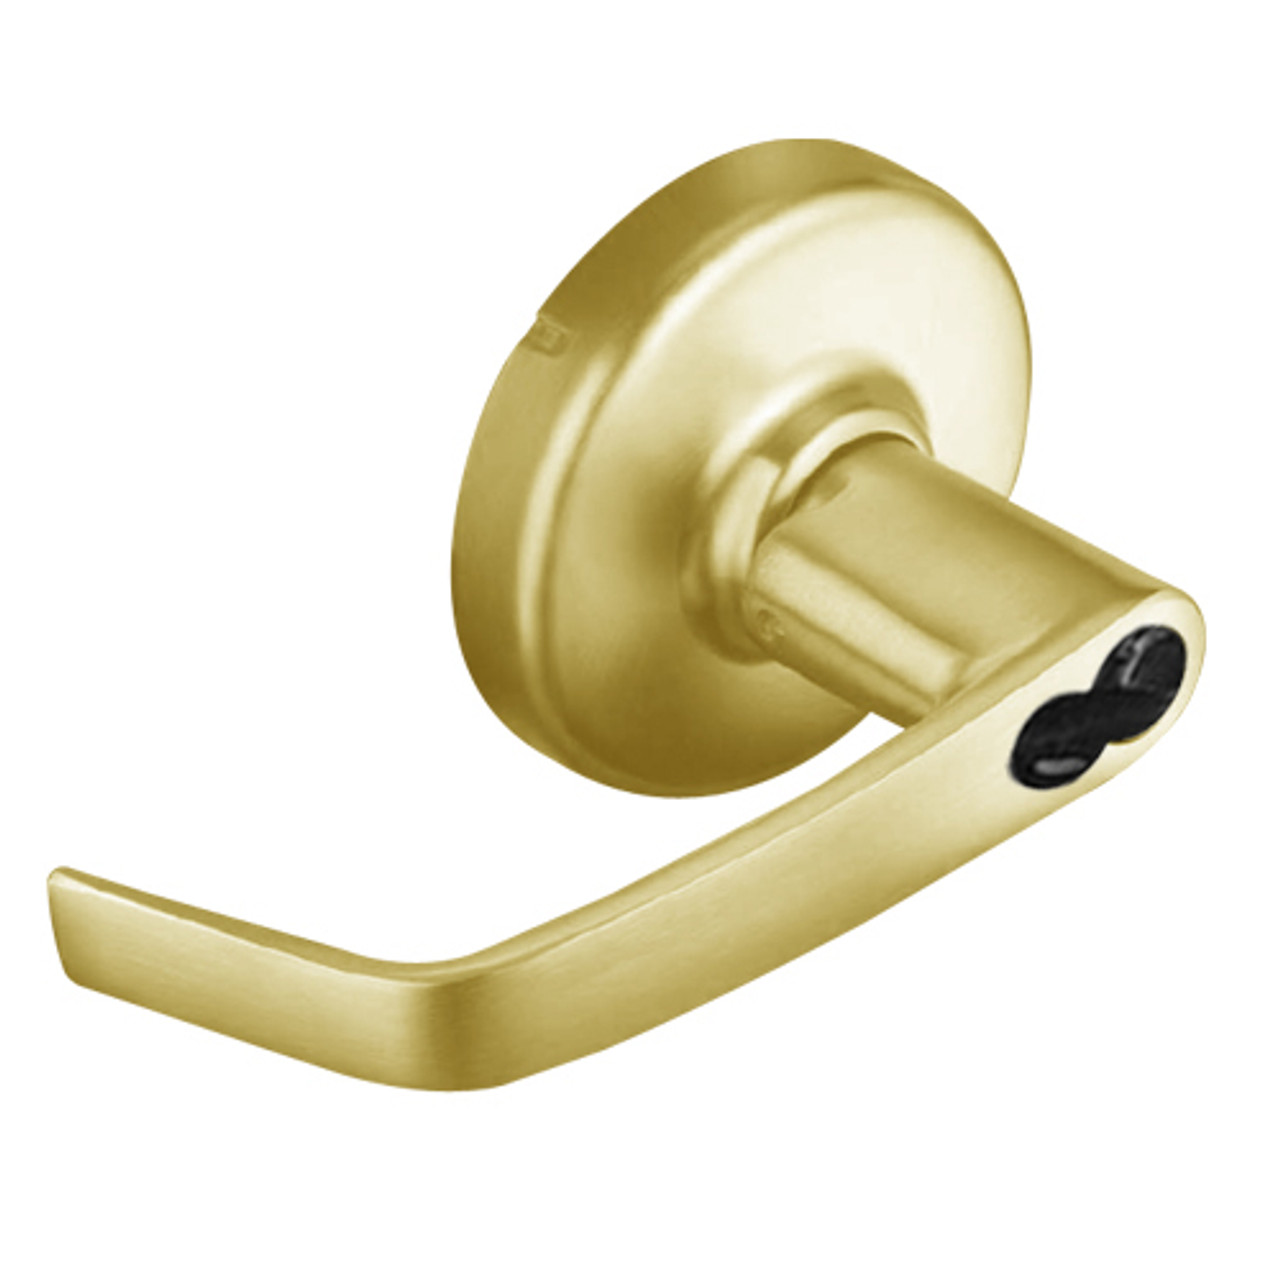 CL3175-NZD-605-CL6 Corbin CL3100 Series Vandal Resistant 6-Pin Less IC Core Corridor or dormitory Cylindrical Locksets with Newport Lever in Bright Brass Finish